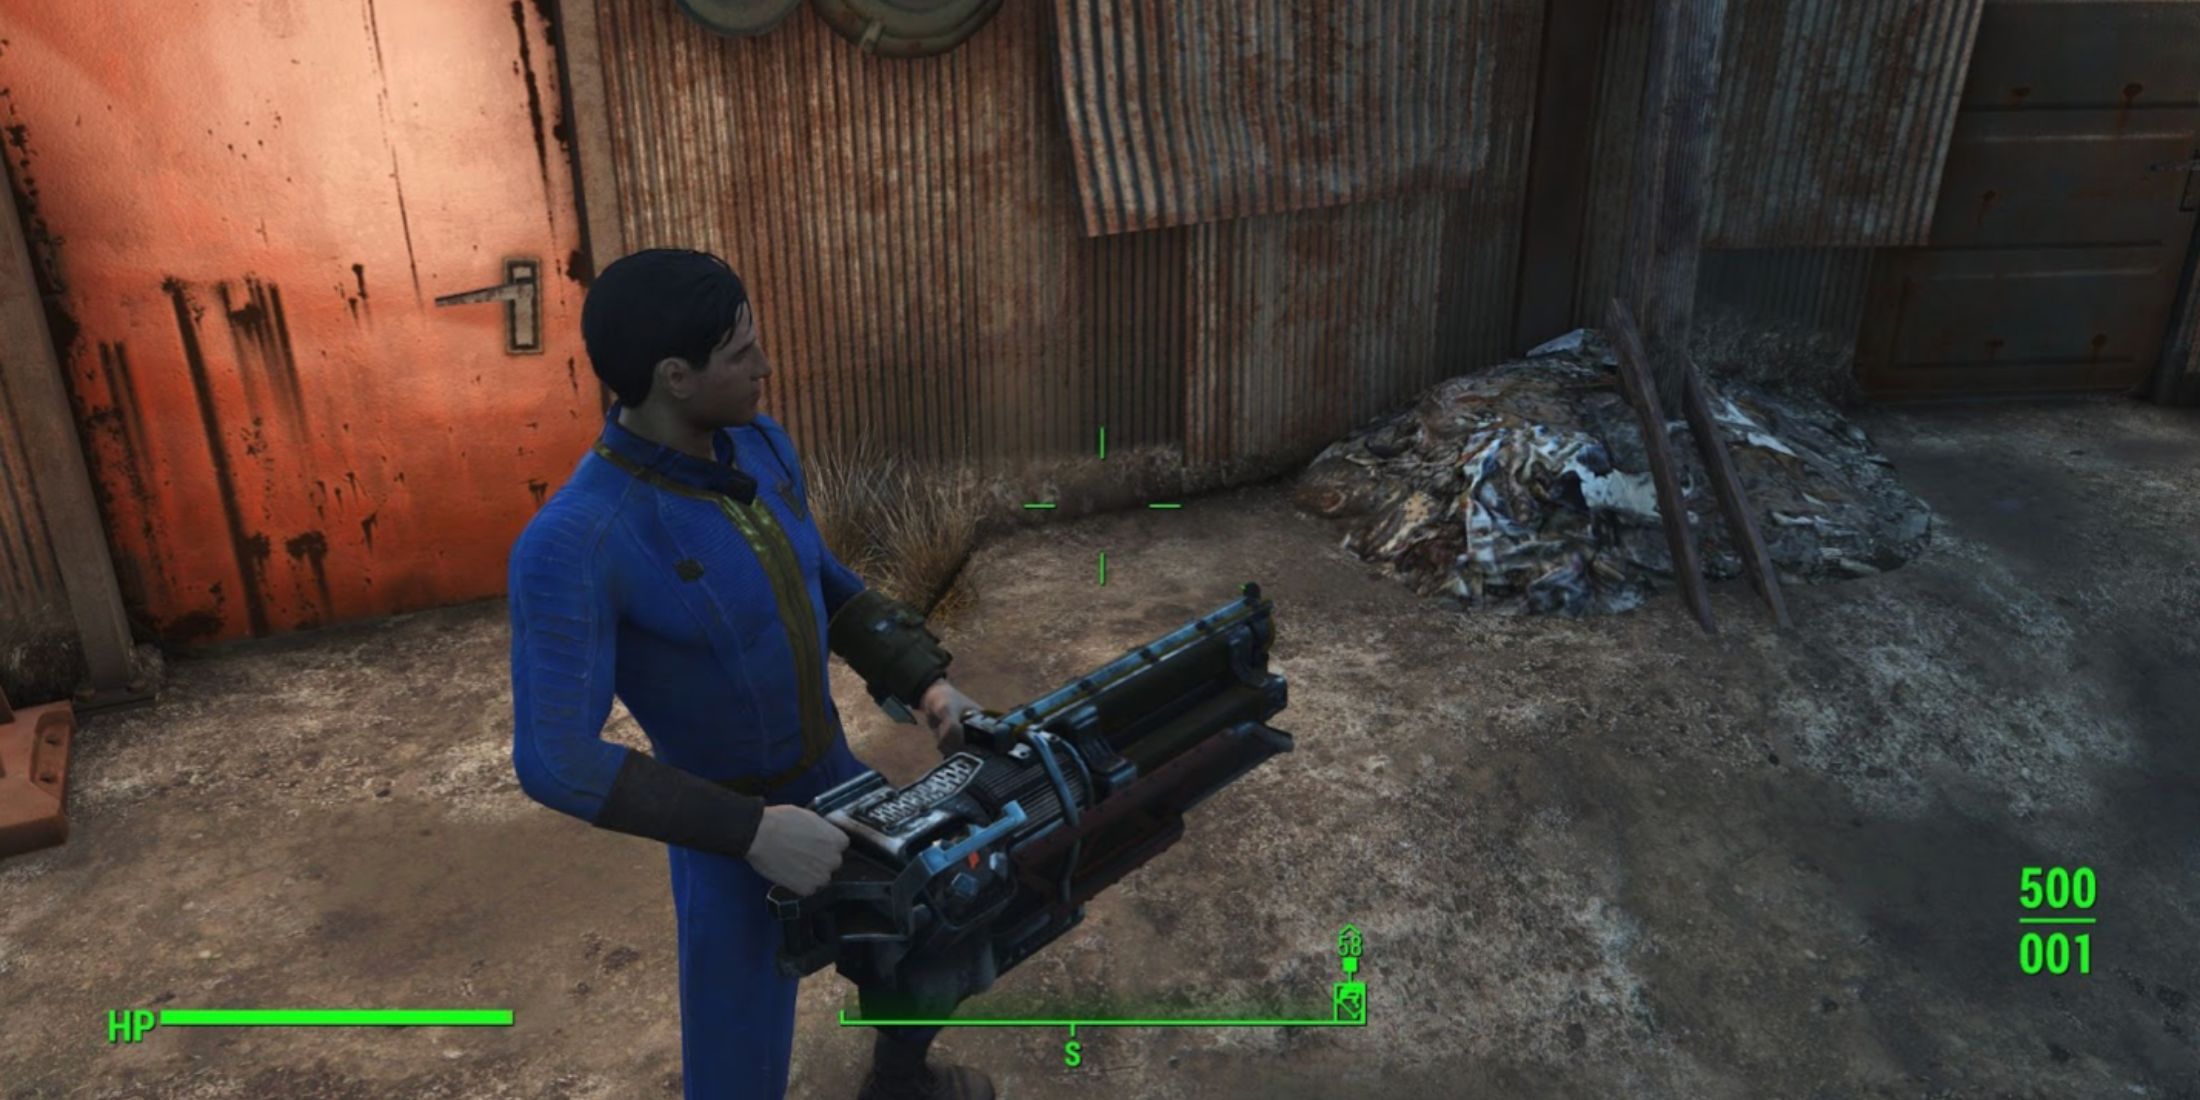 The Sole Survivor holding the gatling laser in Fallout 4